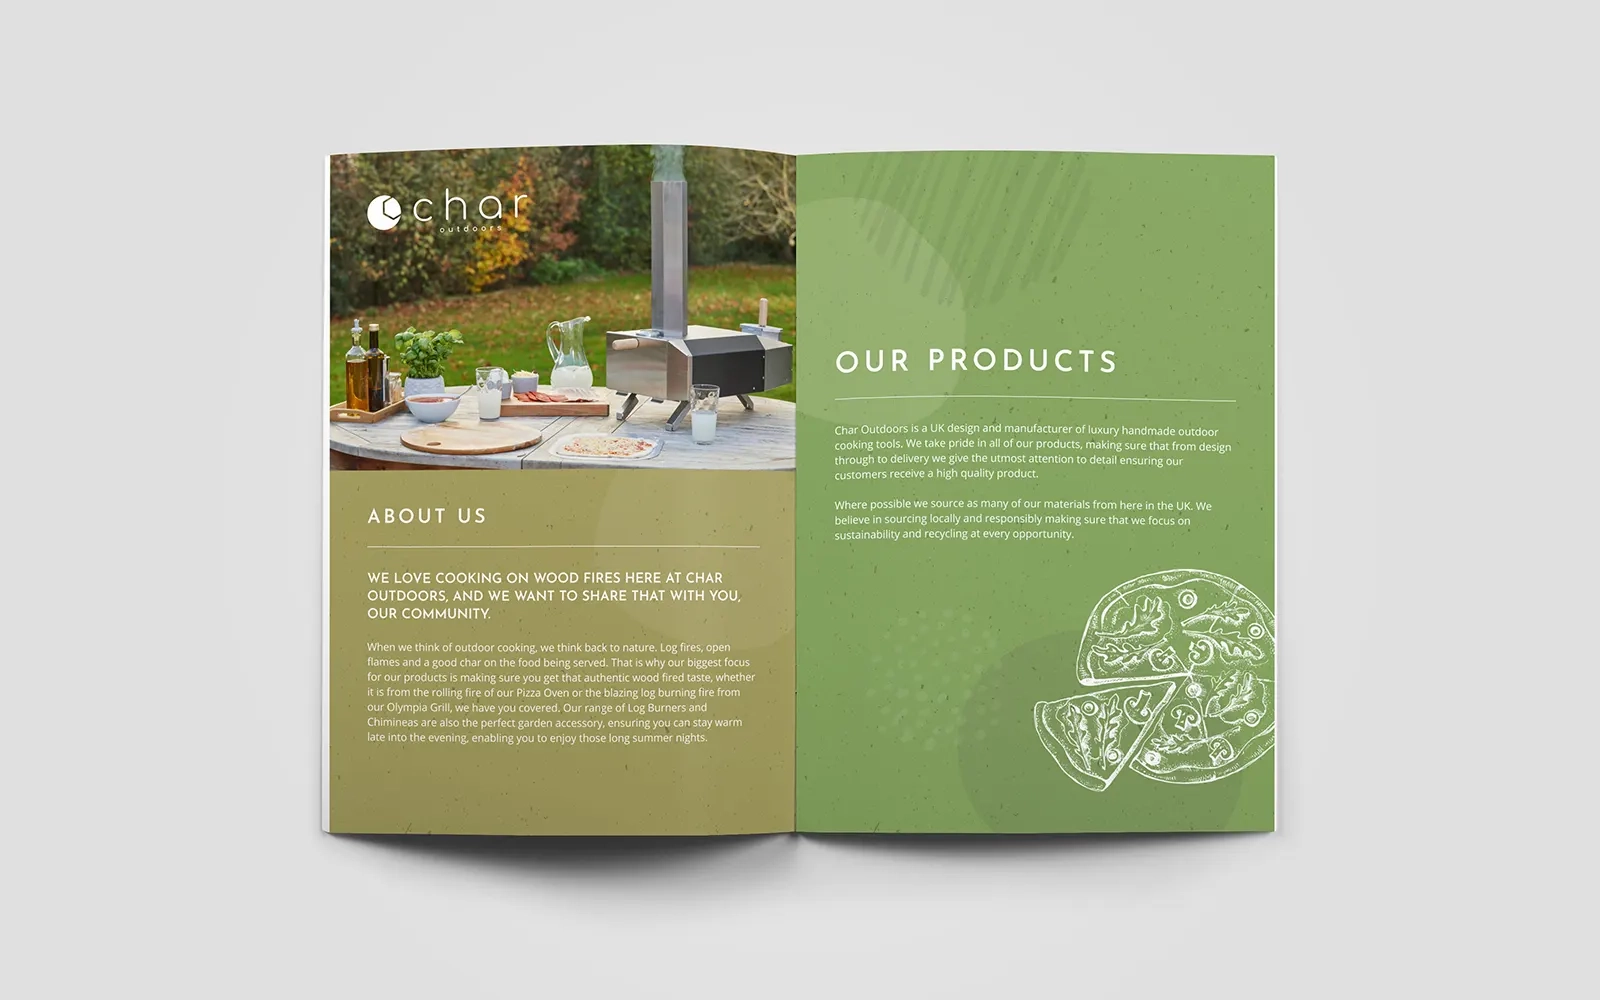  A two page spread of the brochure showing the 'about' page and 'our products' divider page